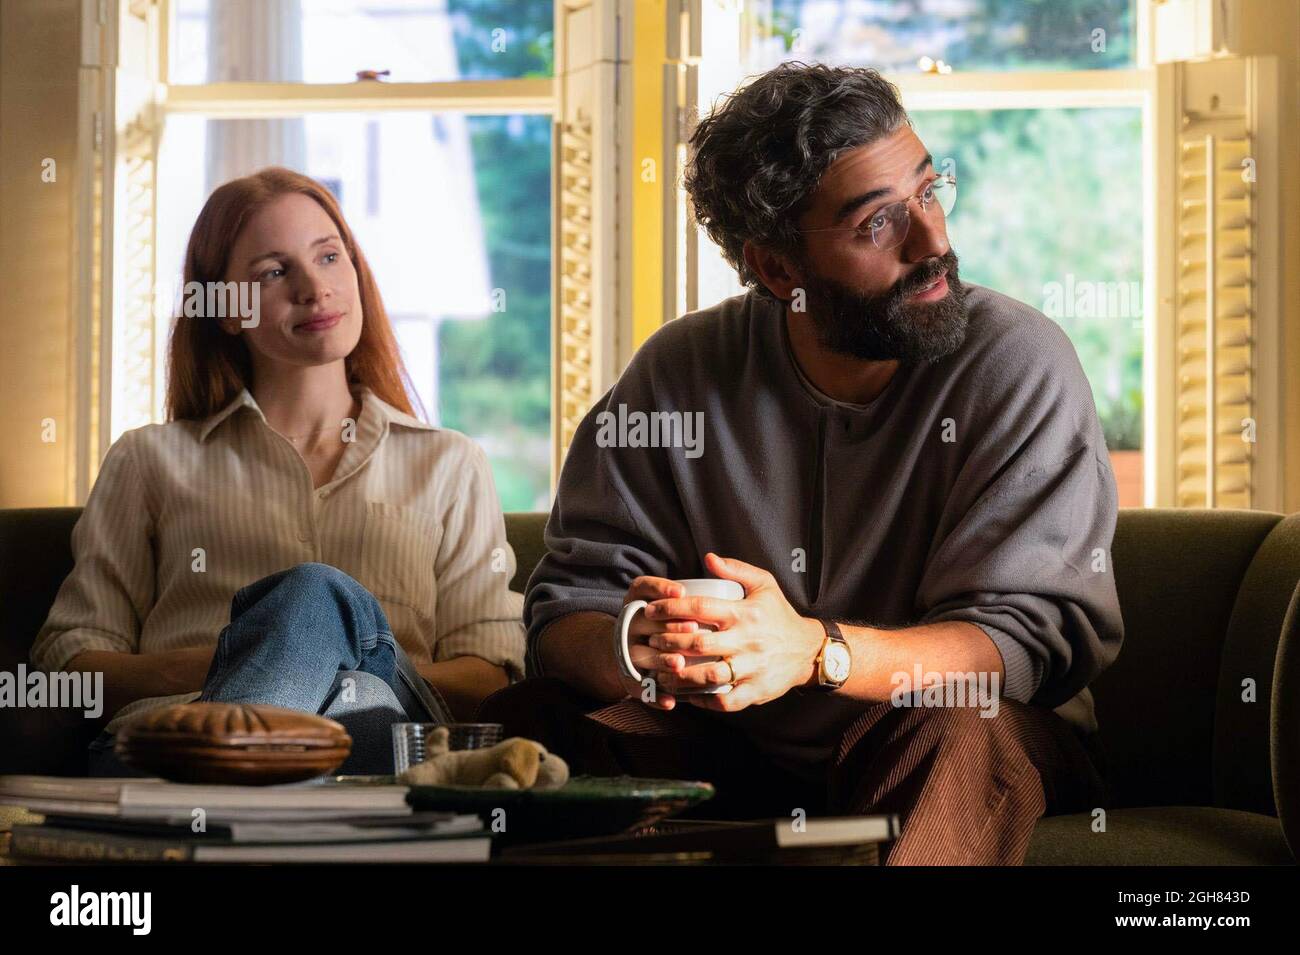 OSCAR ISAAC and JESSICA CHASTAIN in SCENES FROM A MARRIAGE (2021), directed by HAGAI LEVI. Credit: Endeavor Content / Album Stock Photo